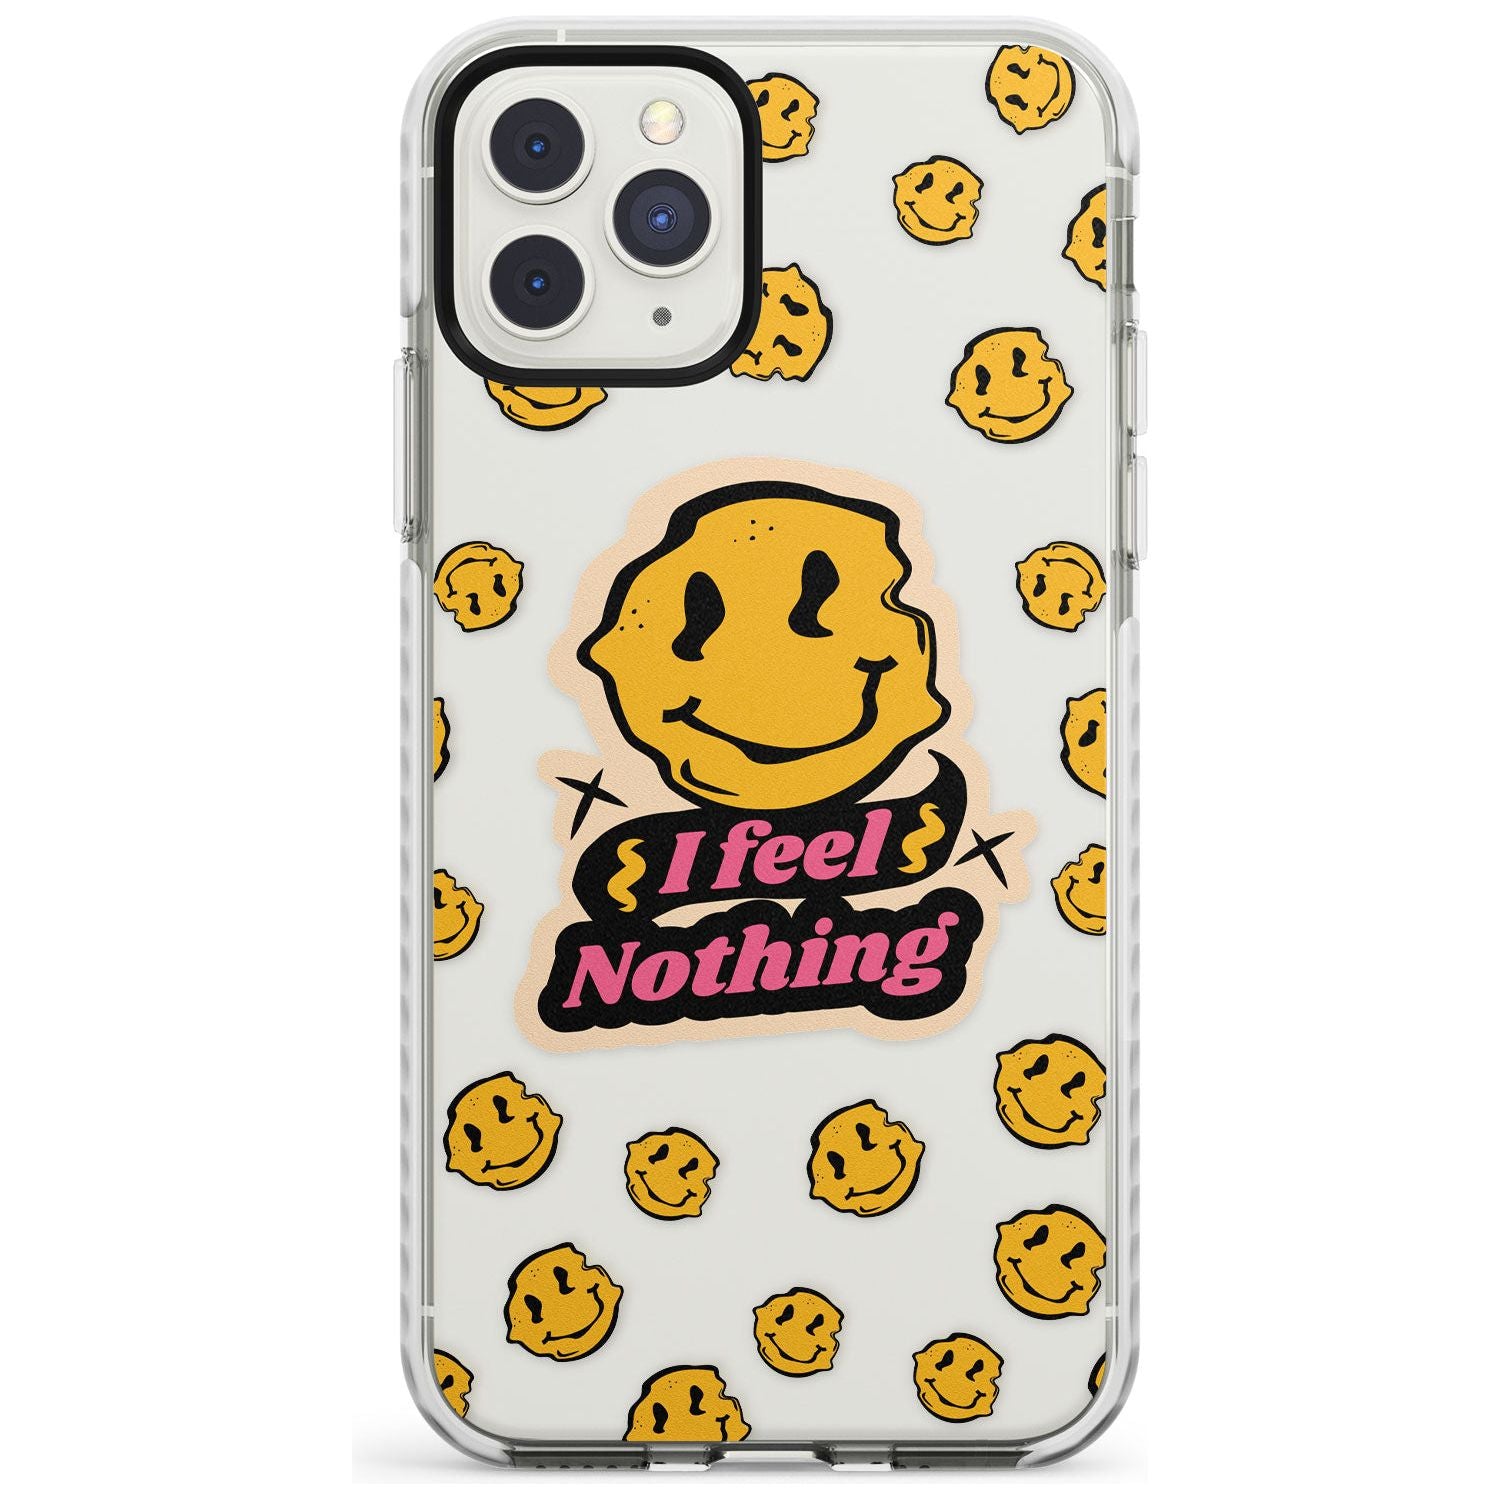 I feel nothing (Clear) Impact Phone Case for iPhone 11 Pro Max